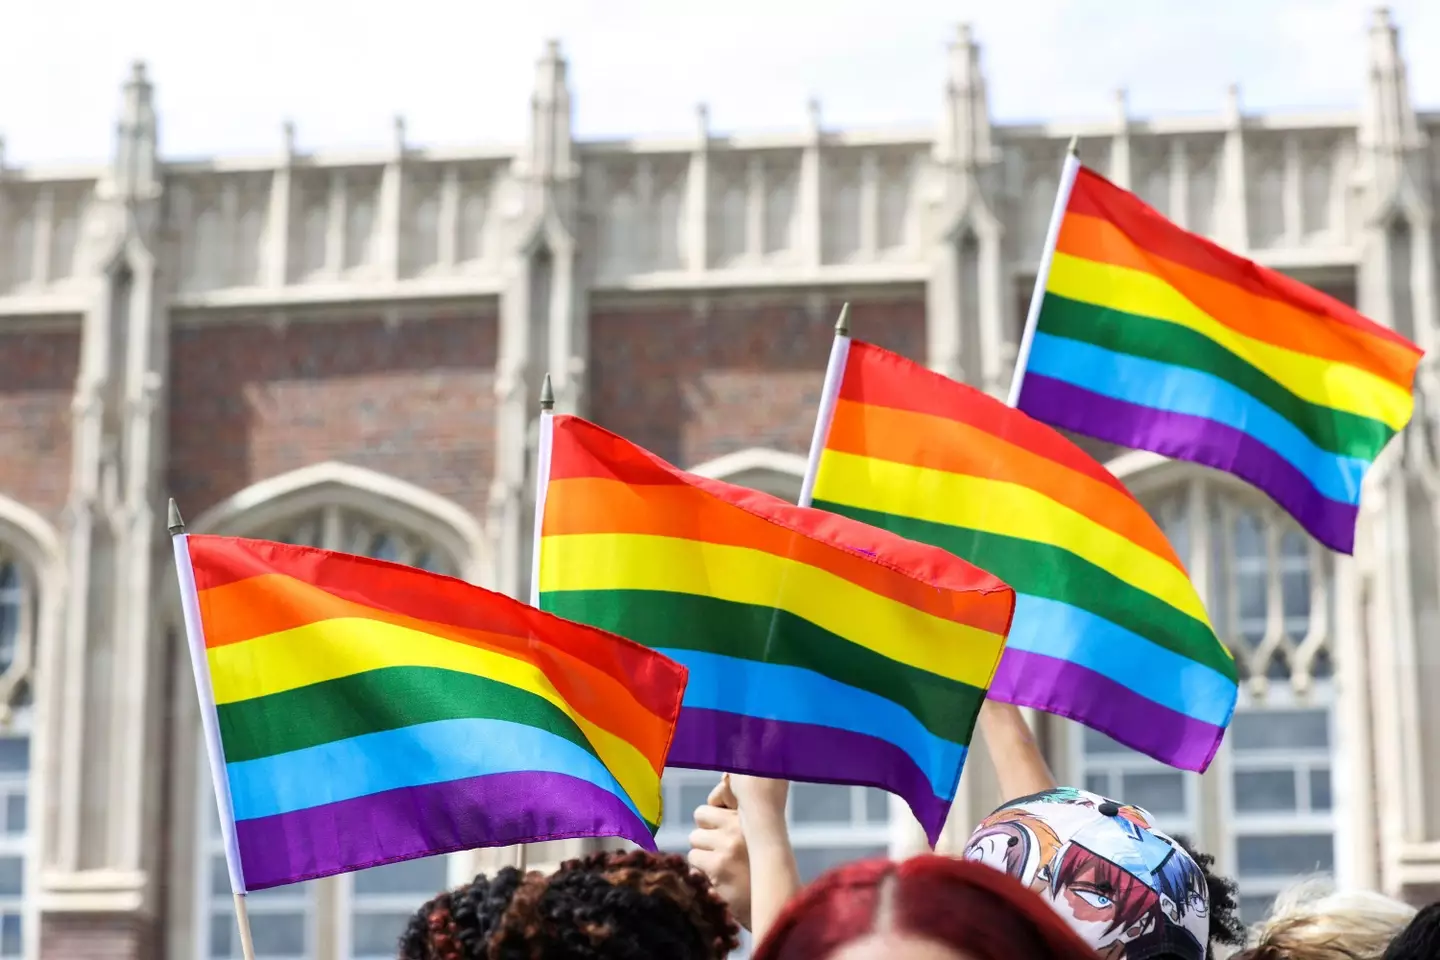 Last month, despite fierce criticism and outrage from LGBTQ+ campaigners, governor of Florida Ron DeSantis signed The Parental Rights in Education bill (HB 1557).